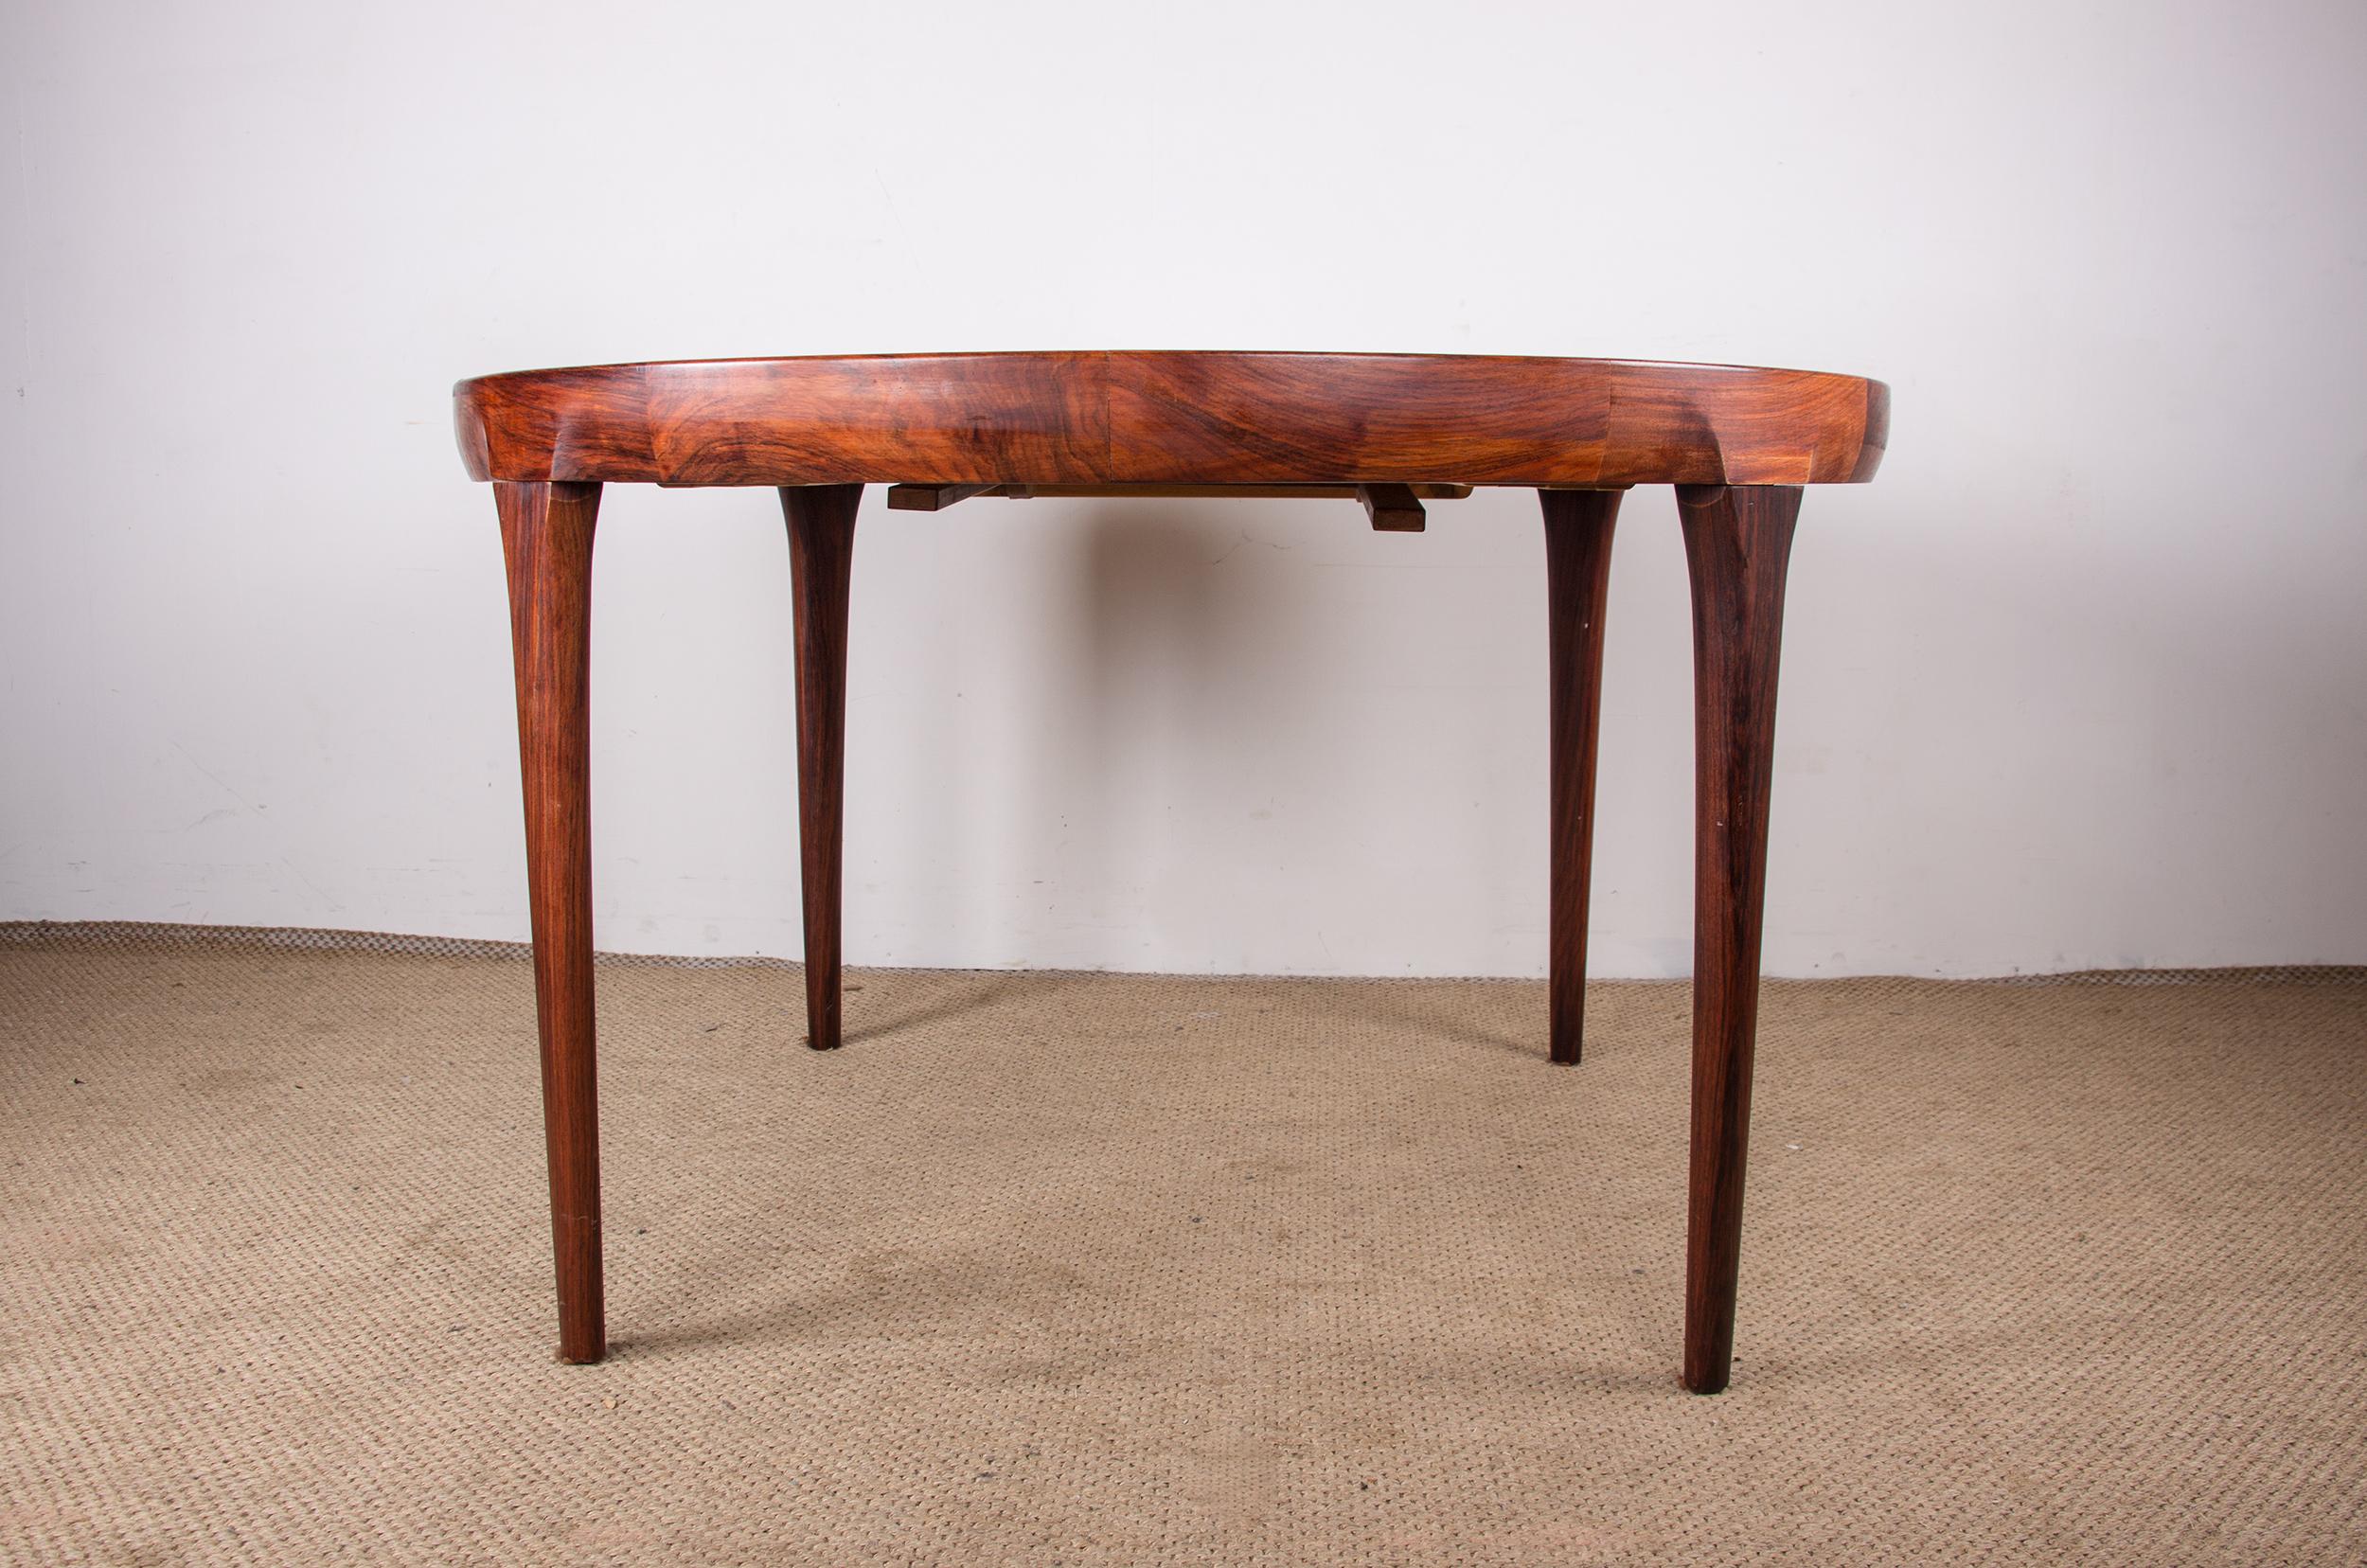 Mid-20th Century Very large extendable Danish dining table (270 cm)  Rosewood by Ib Kofod Larsen.